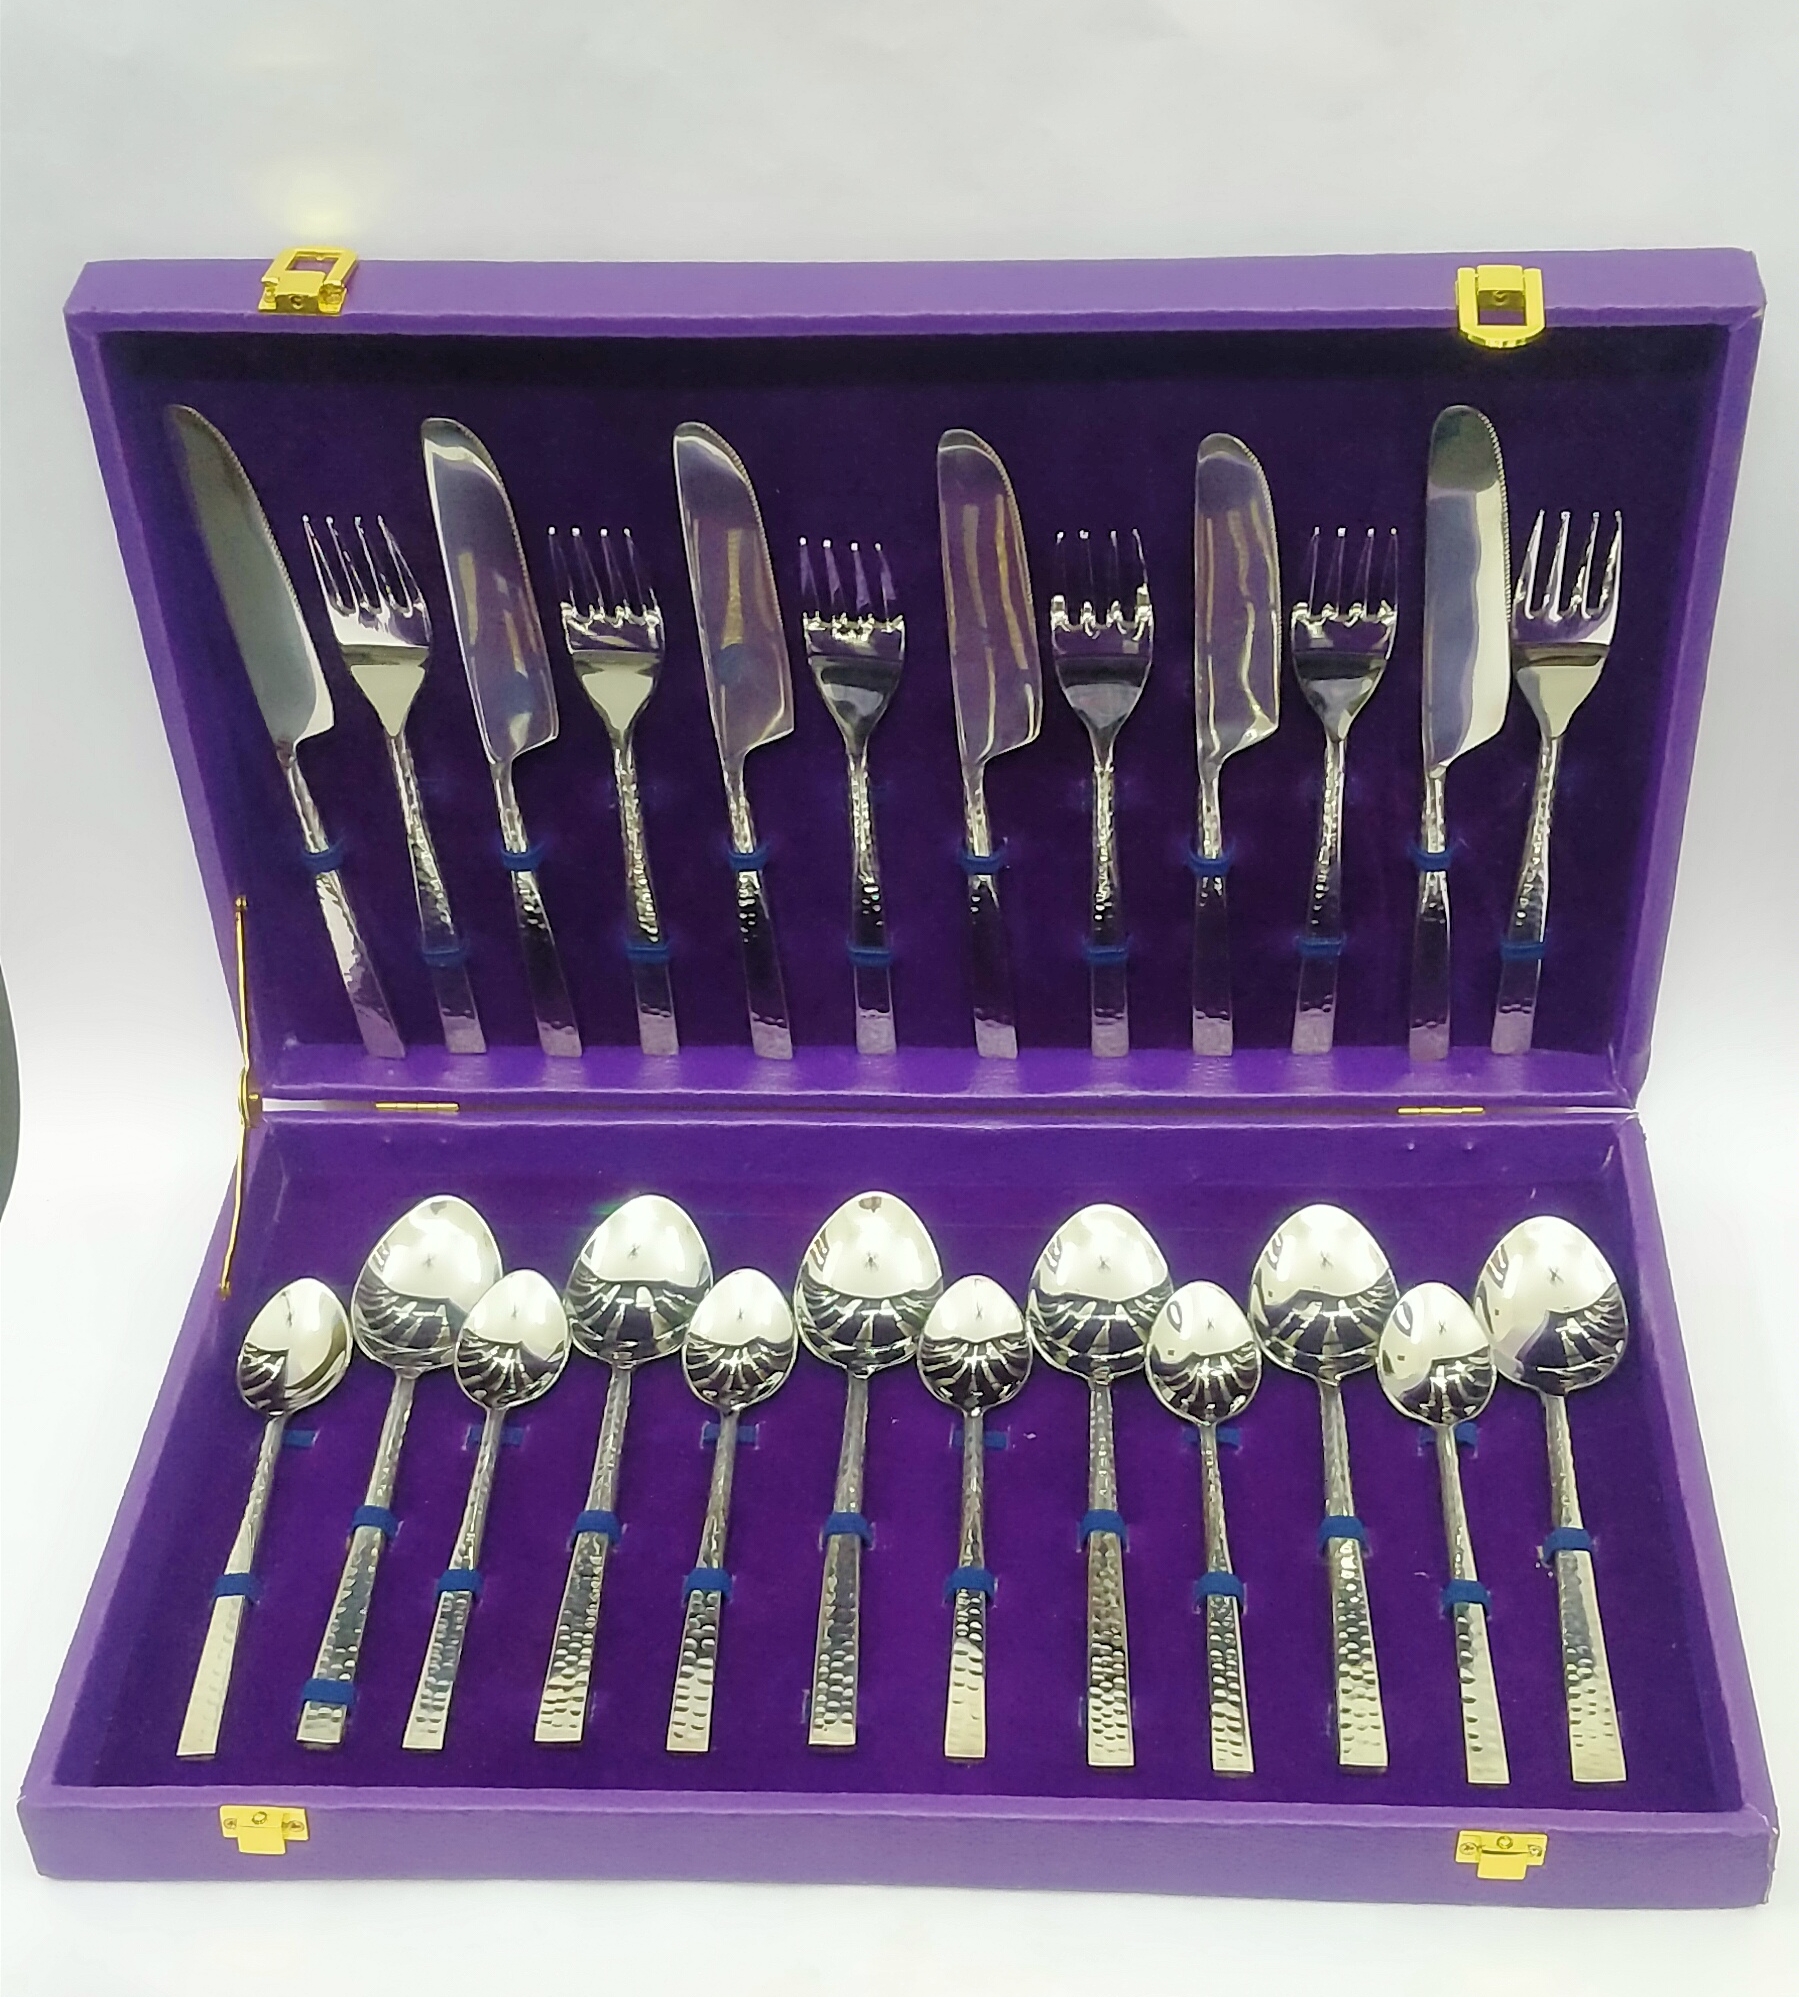 Stainless steel cutlery sets